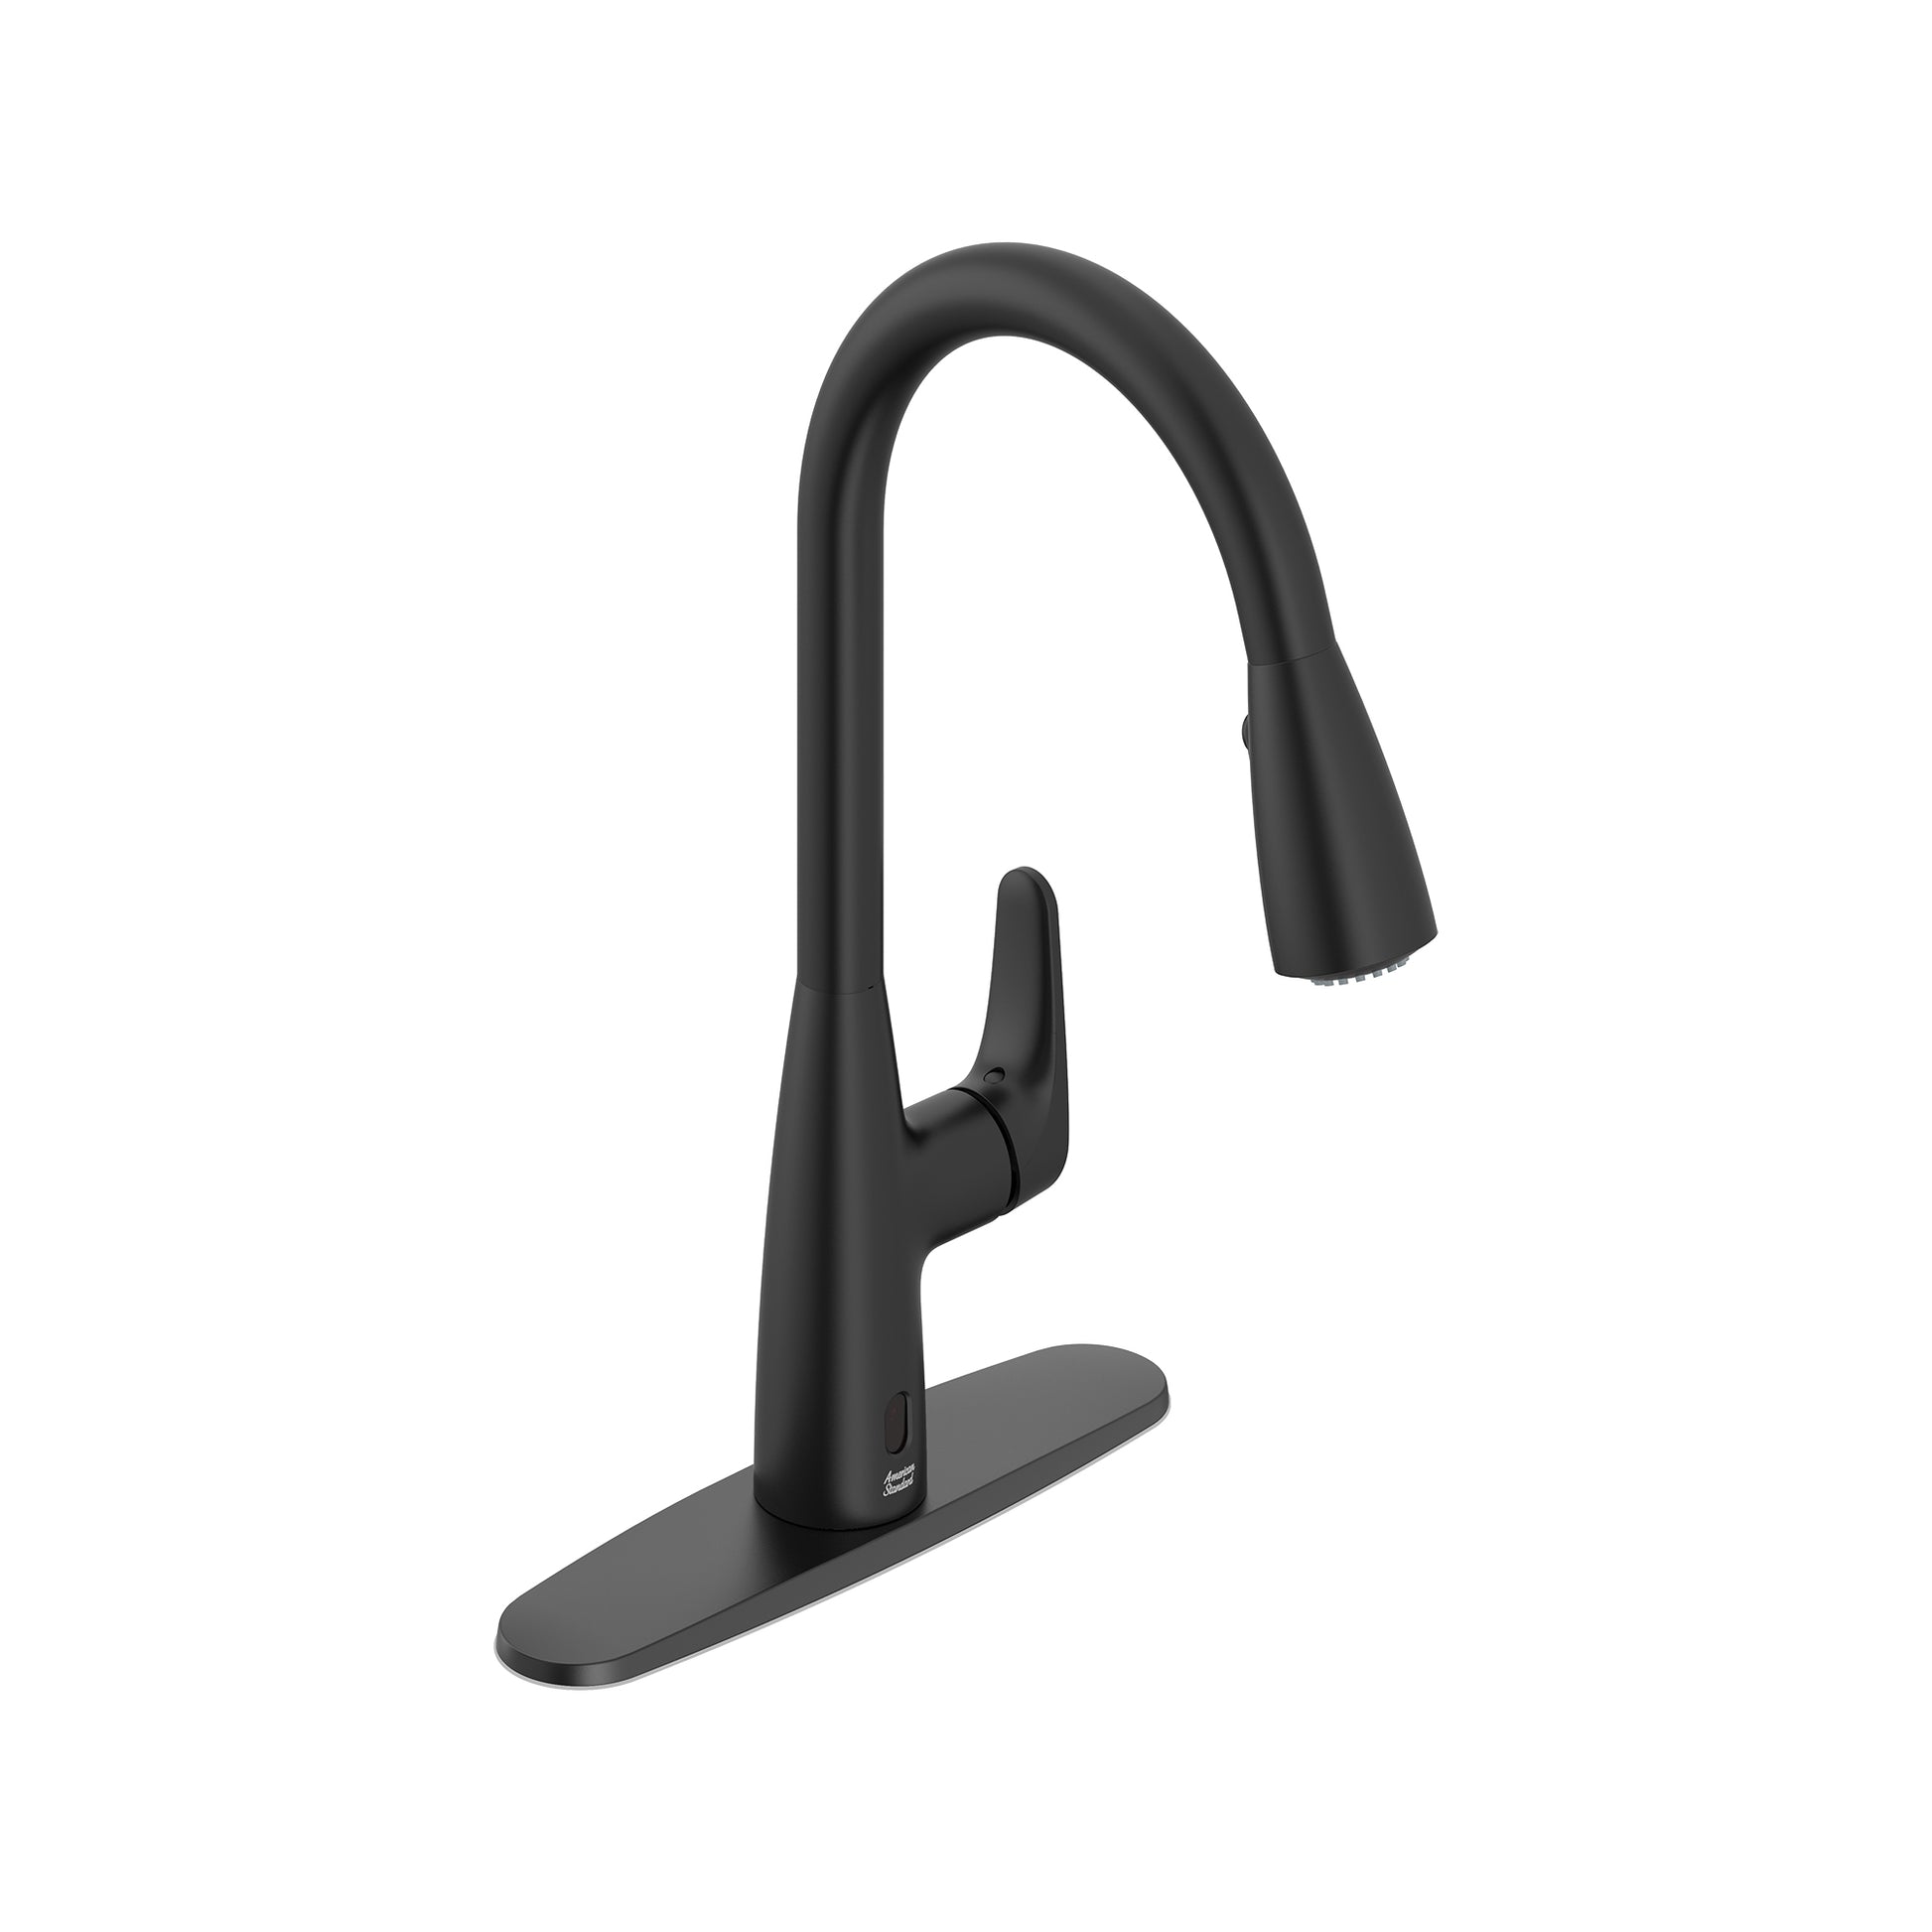 AMERICAN-STANDARD 7077380.243, Colony PRO Touchless Single-Handle Pull-Down Dual Spray Kitchen Faucet 1.5 gpm/5.7 L/min in Matte Black